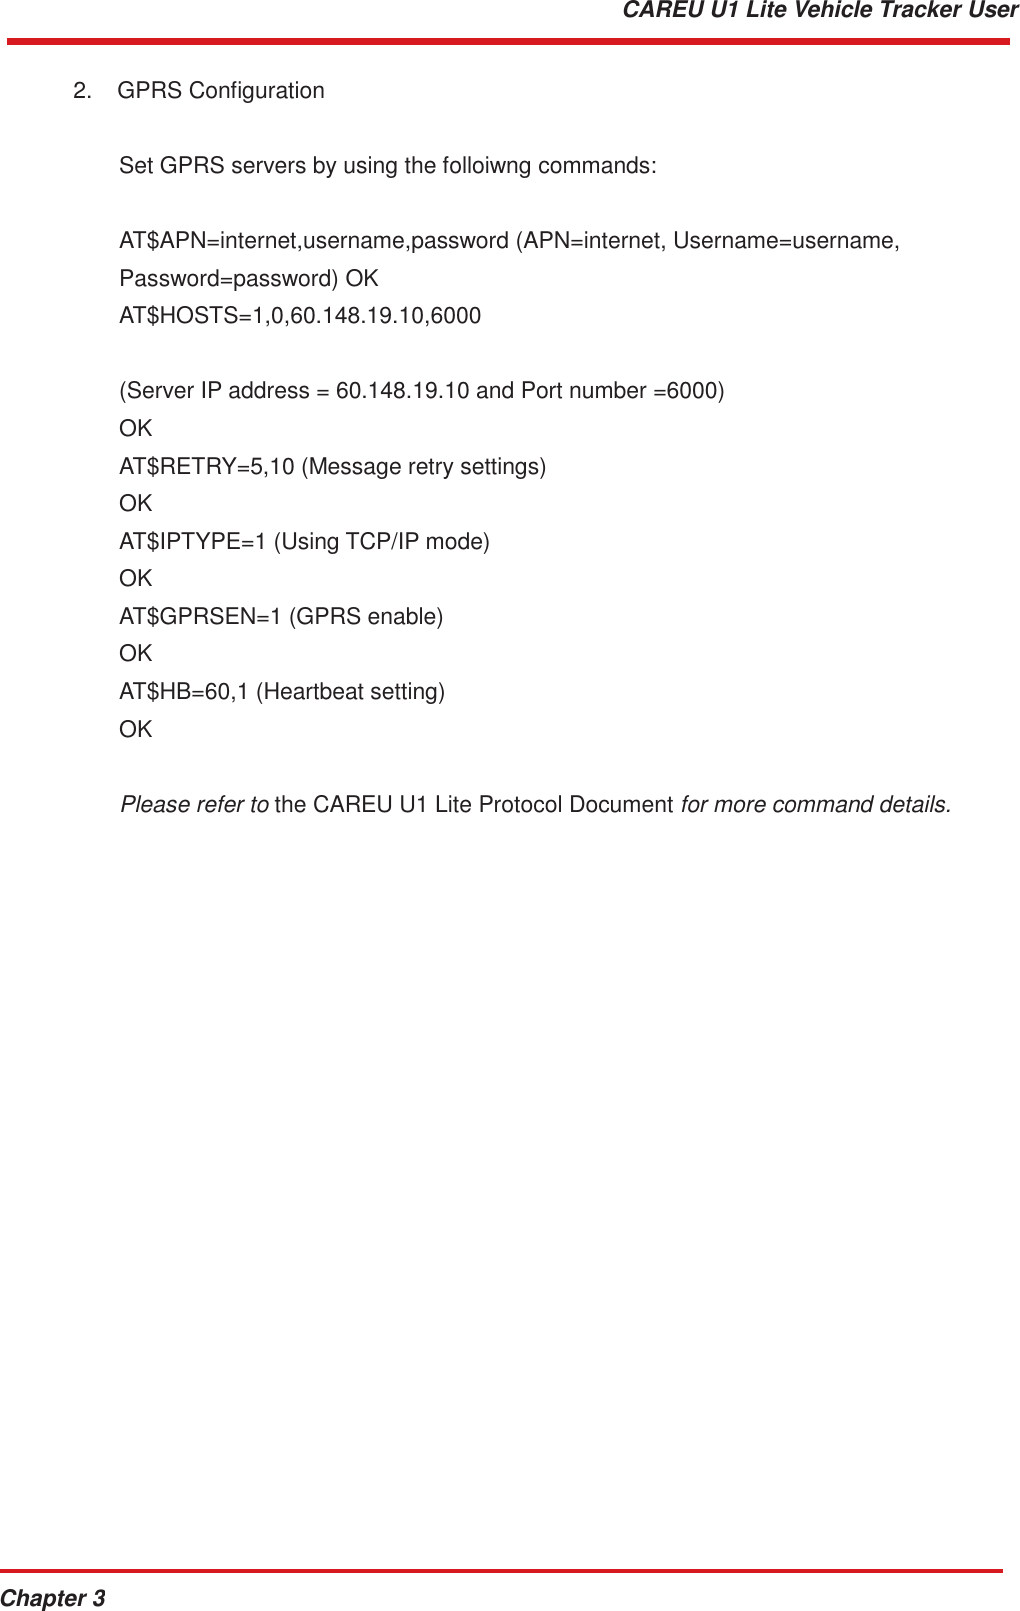 Chapter 3 CAREU U1 Lite Vehicle Tracker User   2.  GPRS Configuration Set GPRS servers by using the folloiwng commands: AT$APN=internet,username,password (APN=internet, Username=username,  Password=password) OK AT$HOSTS=1,0,60.148.19.10,6000   (Server IP address = 60.148.19.10 and Port number =6000) OK AT$RETRY=5,10 (Message retry settings) OK AT$IPTYPE=1 (Using TCP/IP mode) OK AT$GPRSEN=1 (GPRS enable) OK AT$HB=60,1 (Heartbeat setting) OK   Please refer to the CAREU U1 Lite Protocol Document for more command details. 